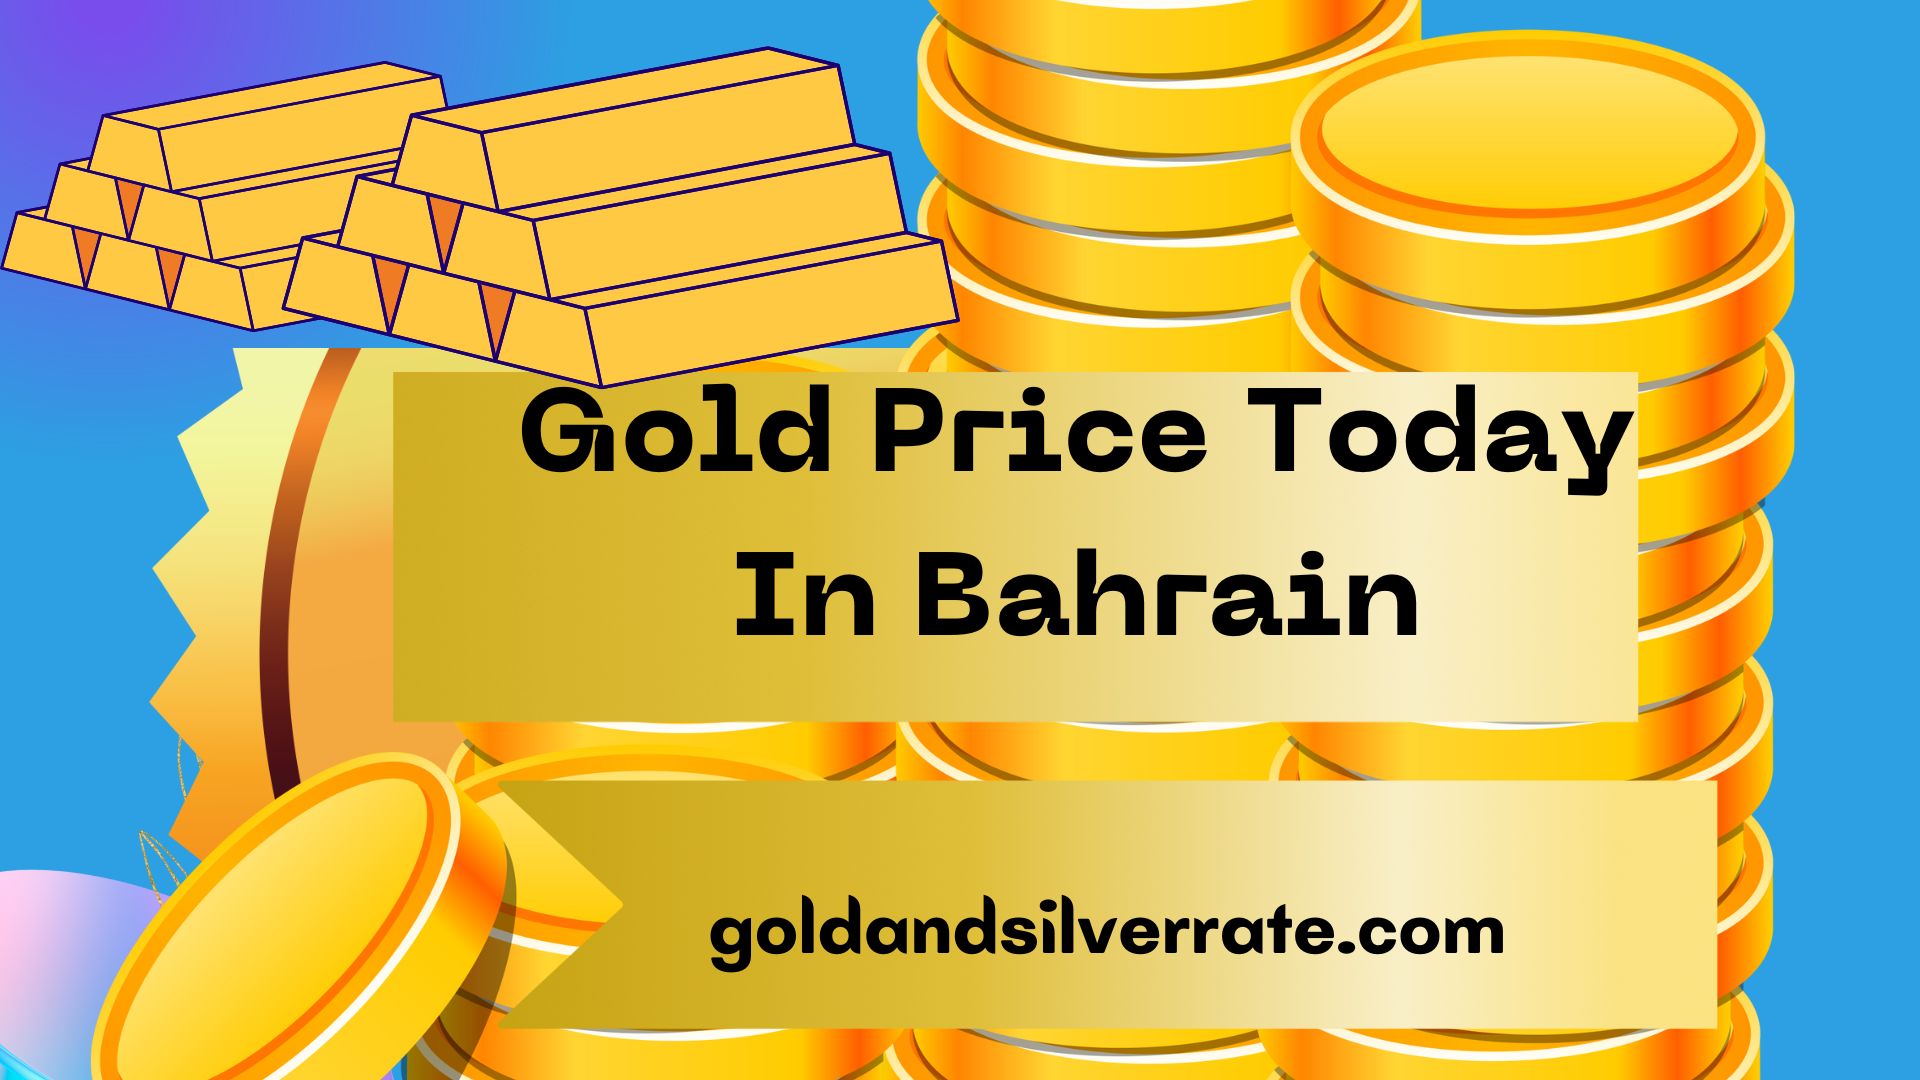 Gold Price Today In Bahrain